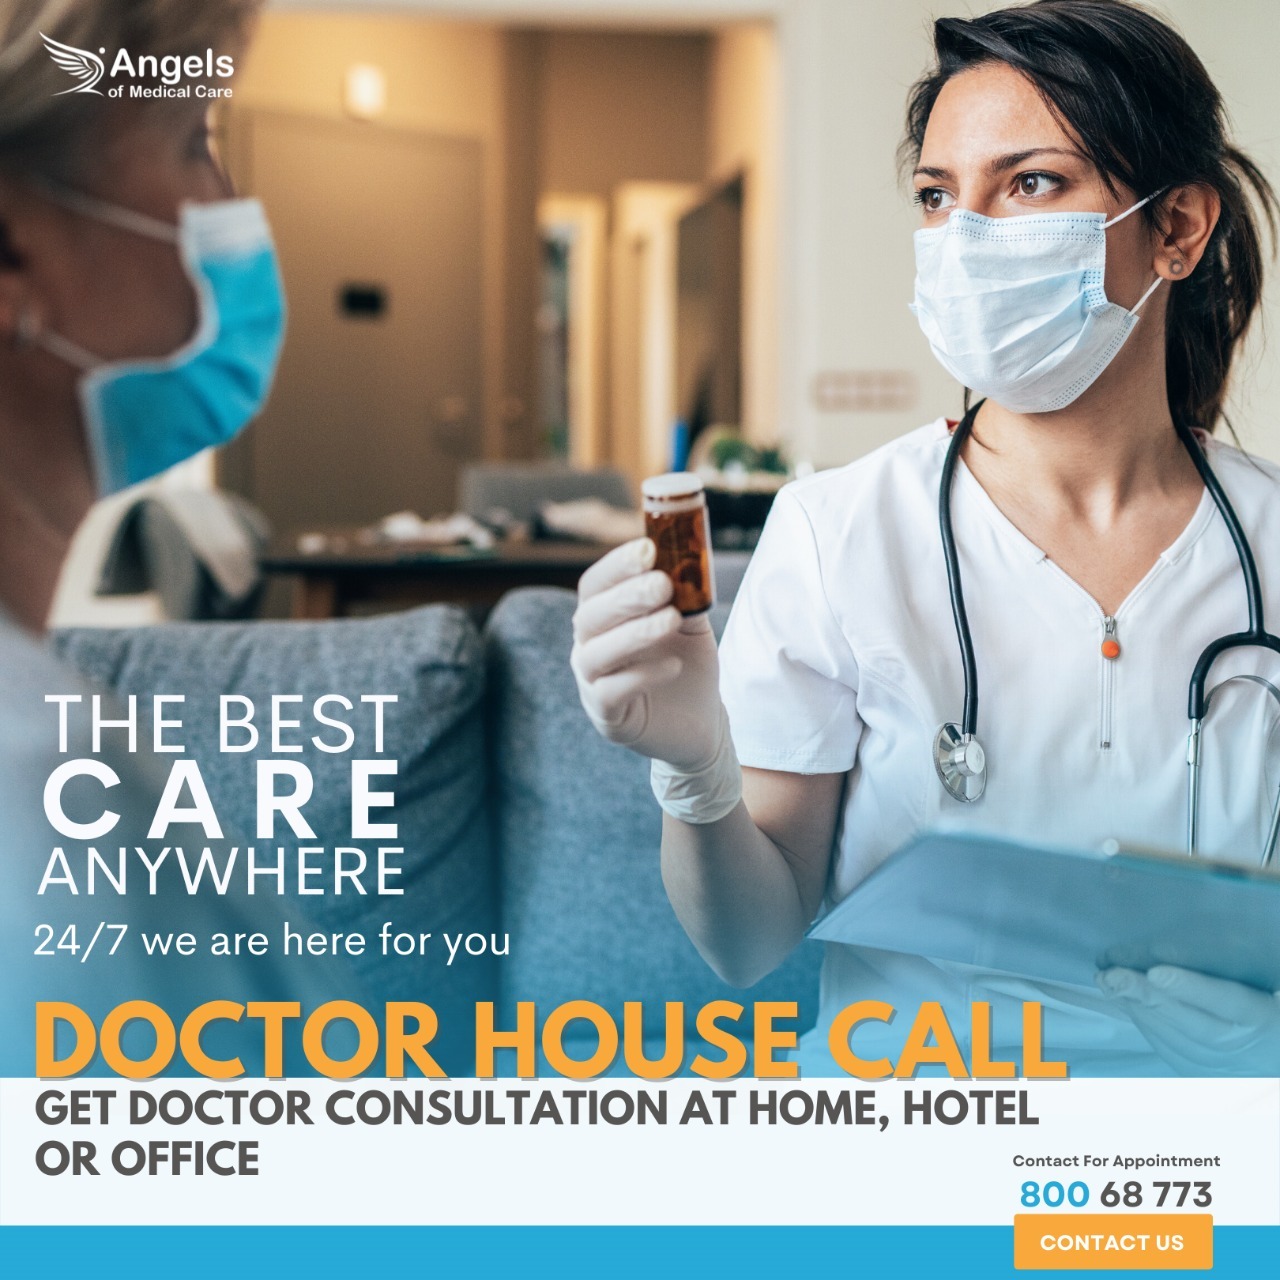 Where can I get Doctor On Call in Dubai?